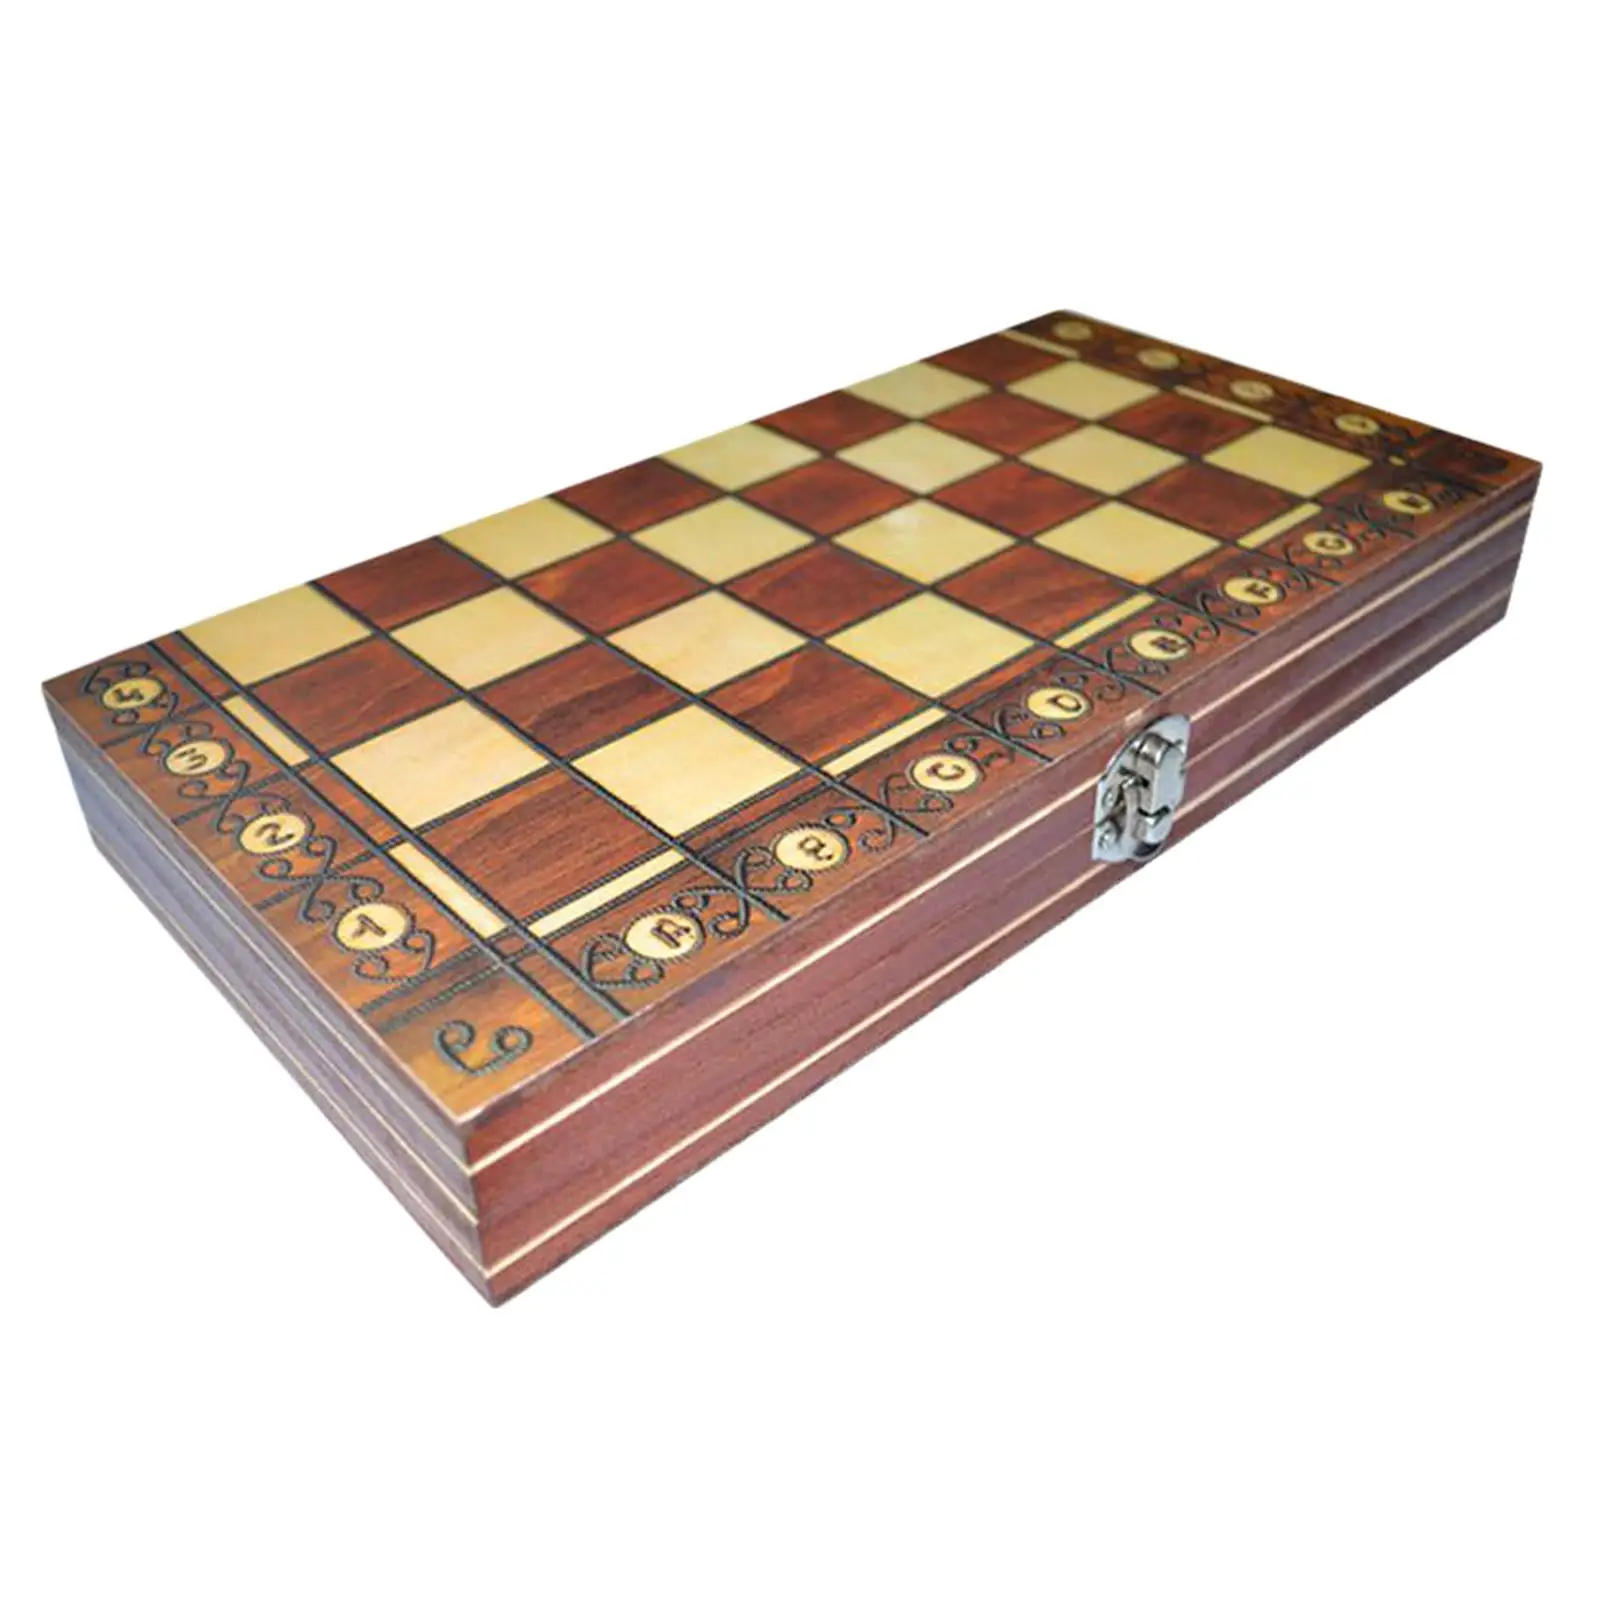 Travel Folding Board Game 3 In 1 Wooden Chess Checkers Backgammon Set Magnetic Chess Board Game Set